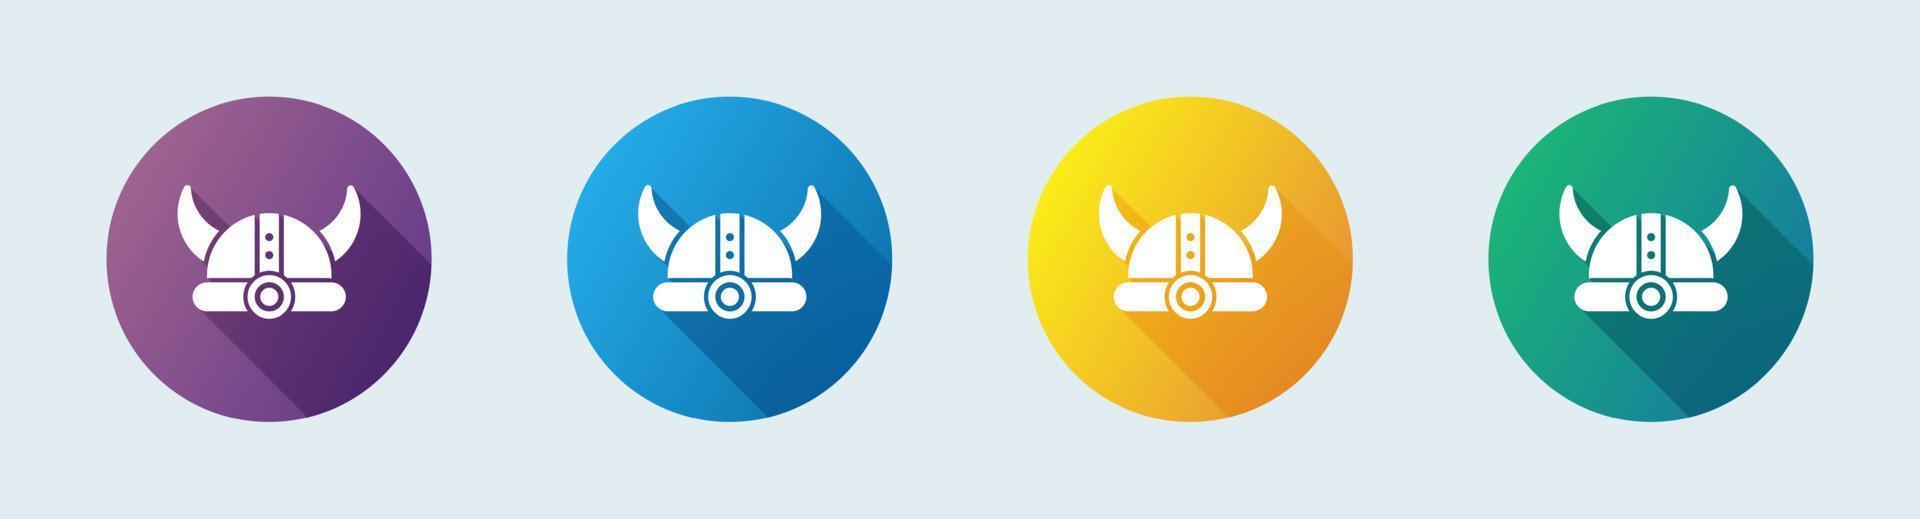 Viking helmet solid icon in flat design style. Helmet with horns signs vector illustration.